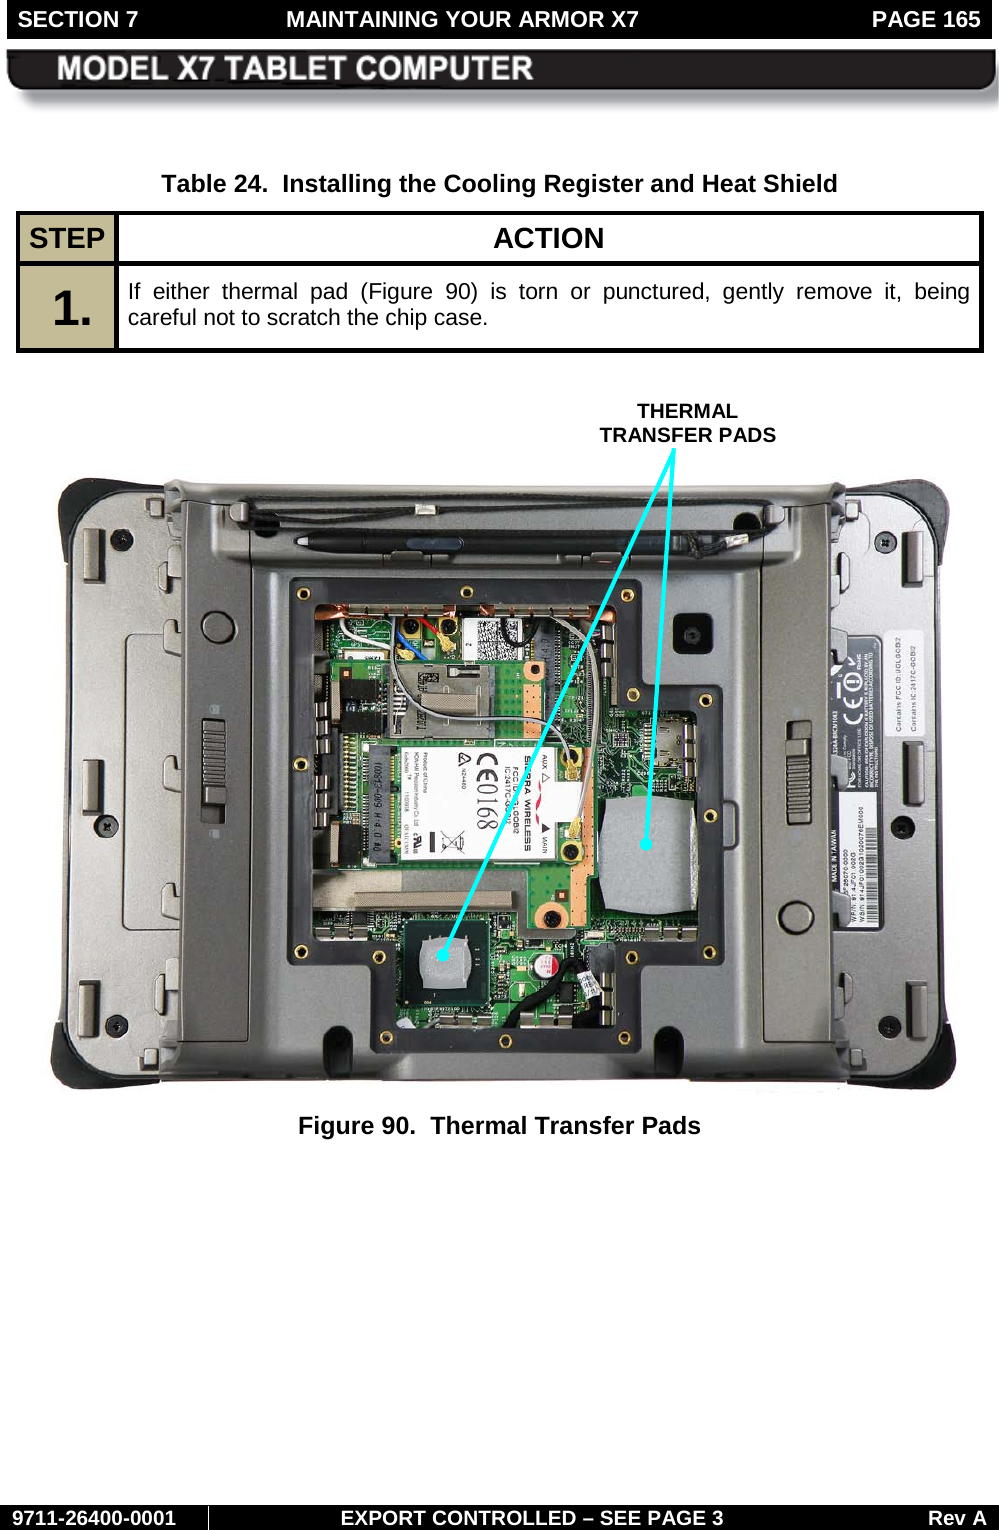 SECTION 7  MAINTAINING YOUR ARMOR X7  PAGE 165        9711-26400-0001 EXPORT CONTROLLED – SEE PAGE 3 Rev A  Table 24.  Installing the Cooling Register and Heat Shield STEP  ACTION 1.  If either thermal pad (Figure  90)  is torn or punctured, gently remove it, being careful not to scratch the chip case.     Figure 90.  Thermal Transfer Pads     THERMAL TRANSFER PADS 